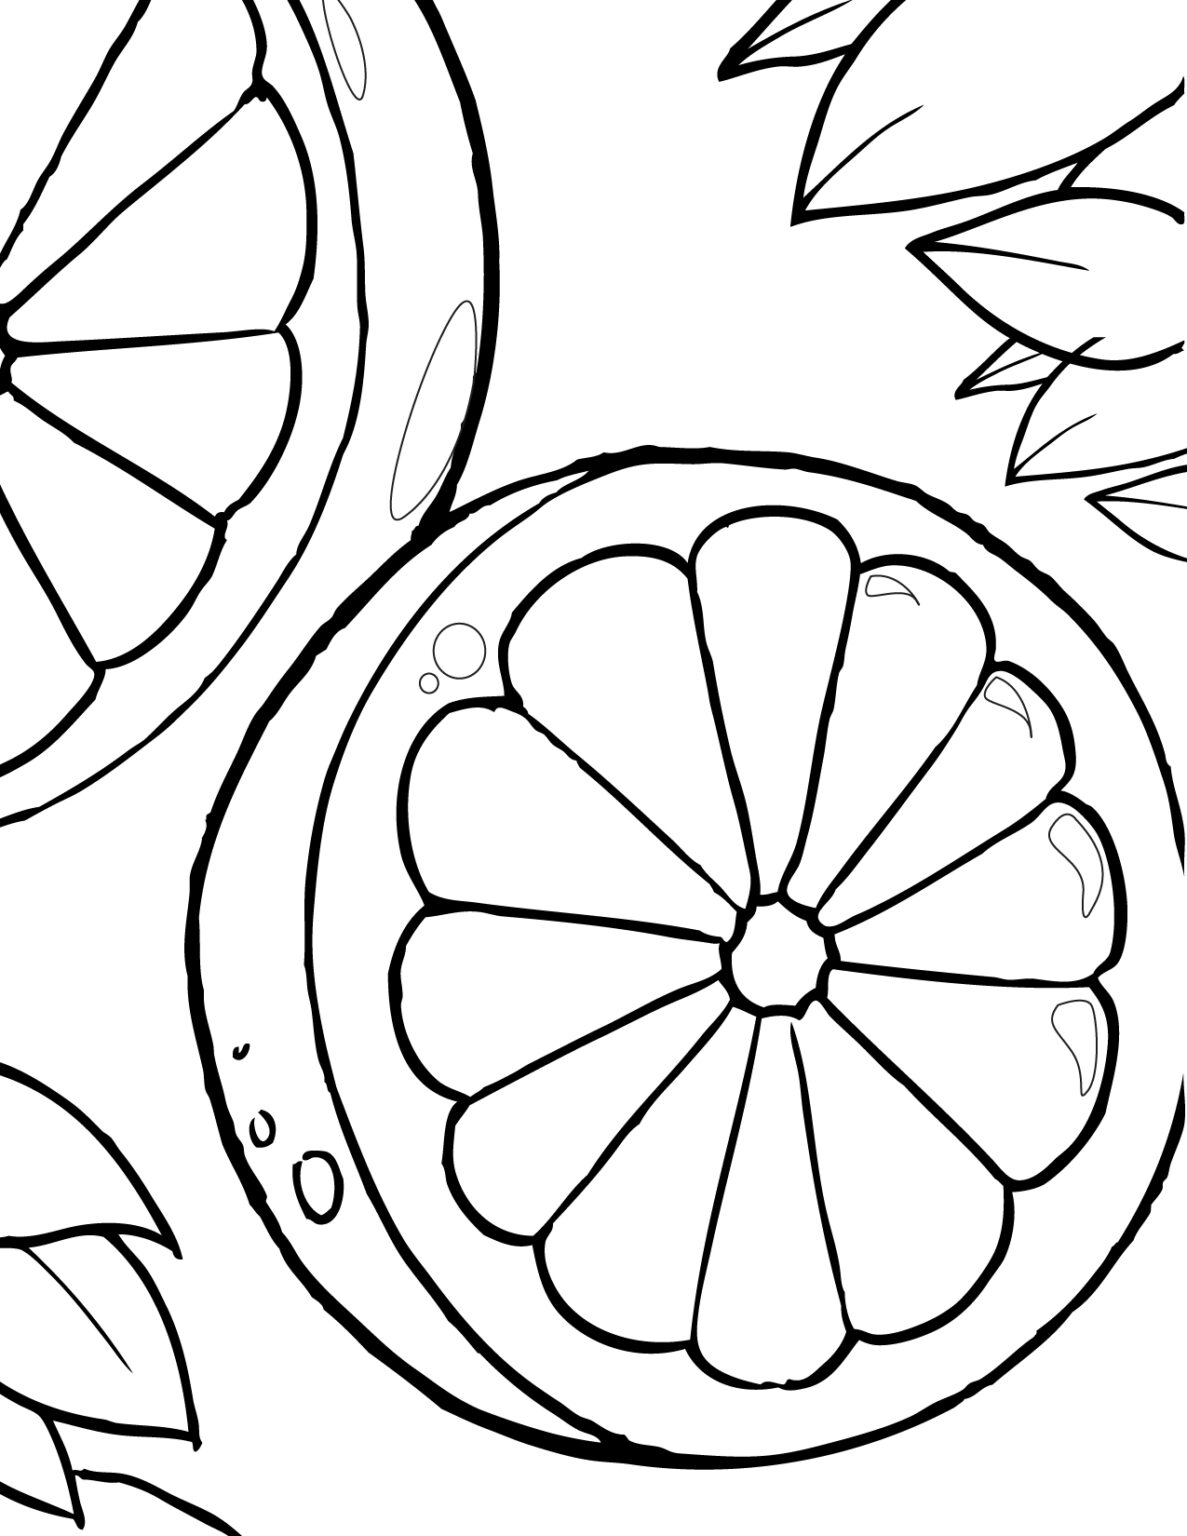 Lemon Halves coloring book to print and online